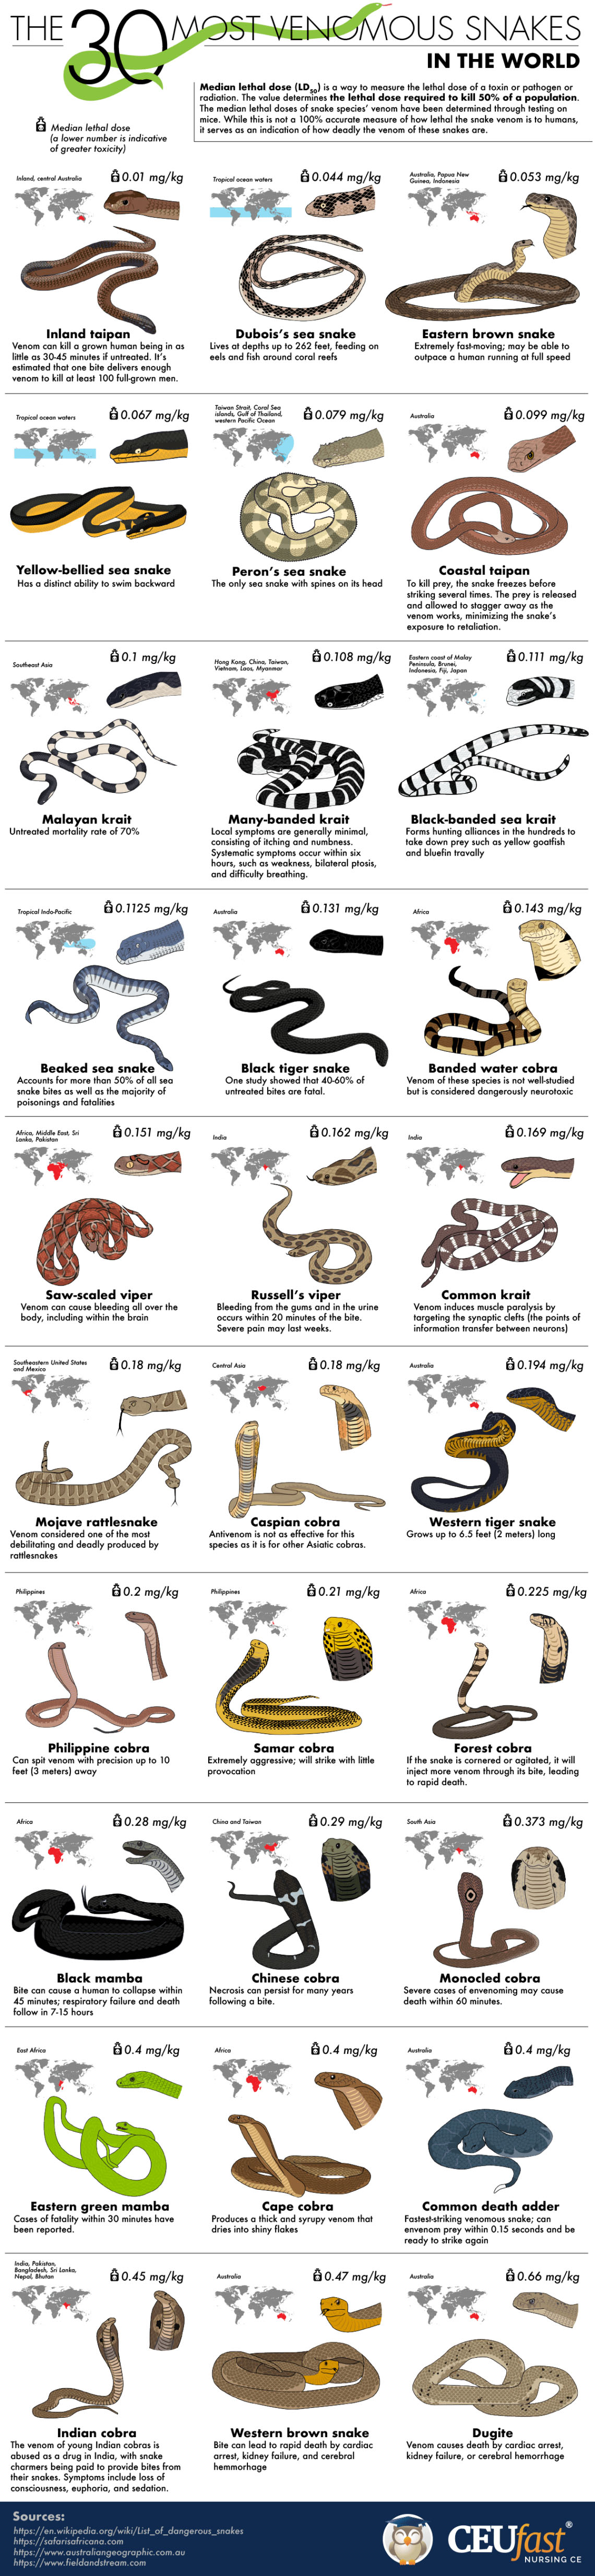 The 30 Most Venomous Snakes in the World